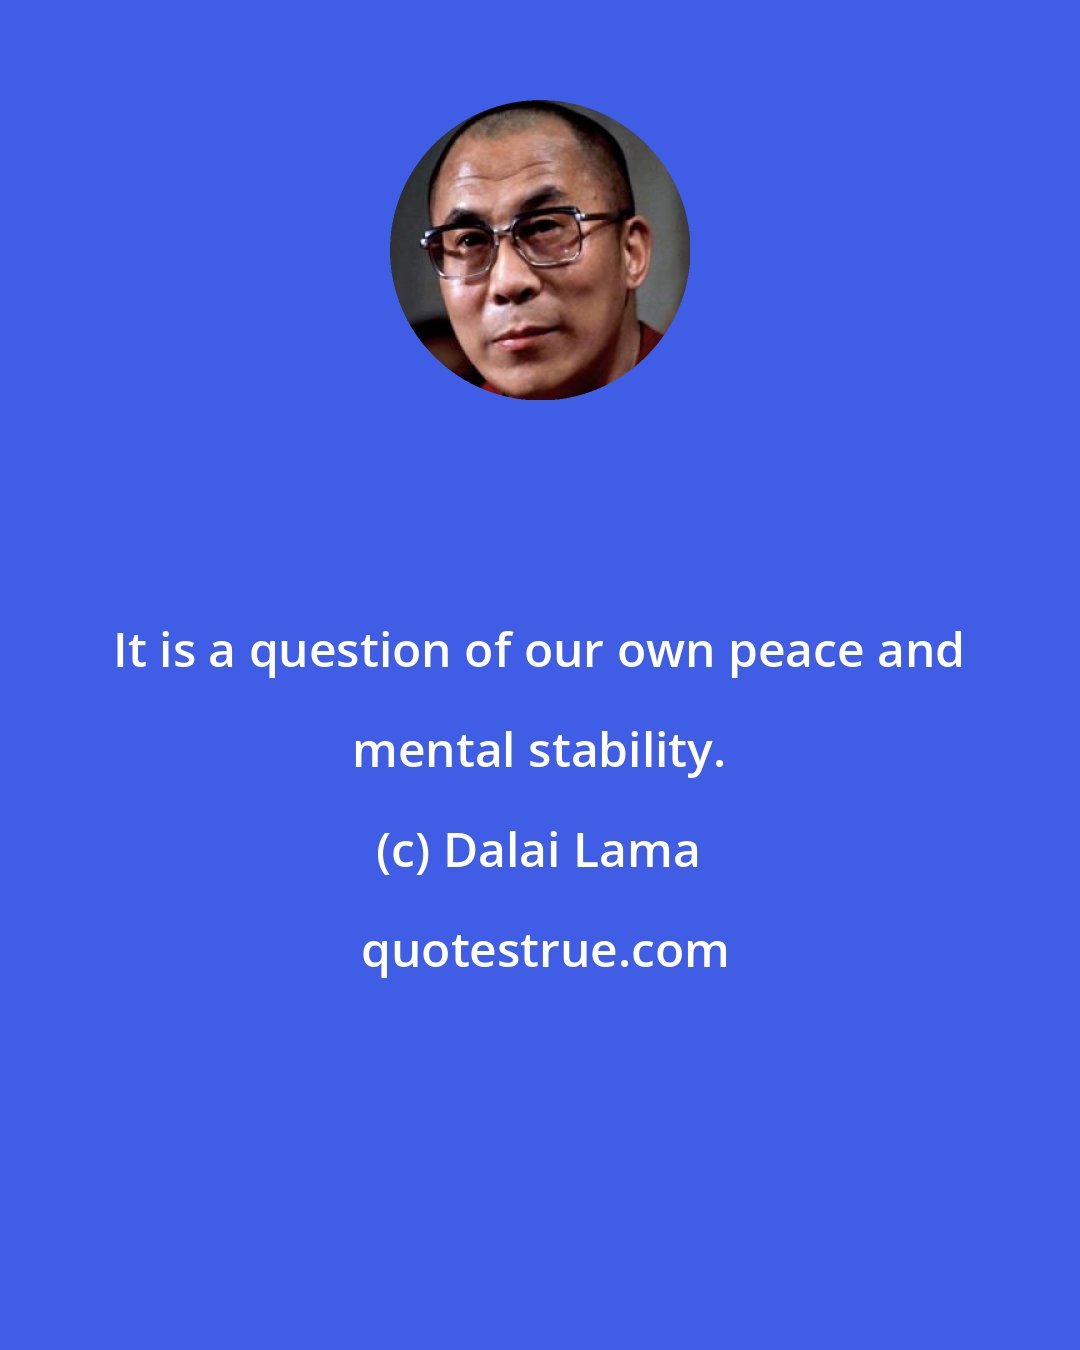 Dalai Lama: It is a question of our own peace and mental stability.